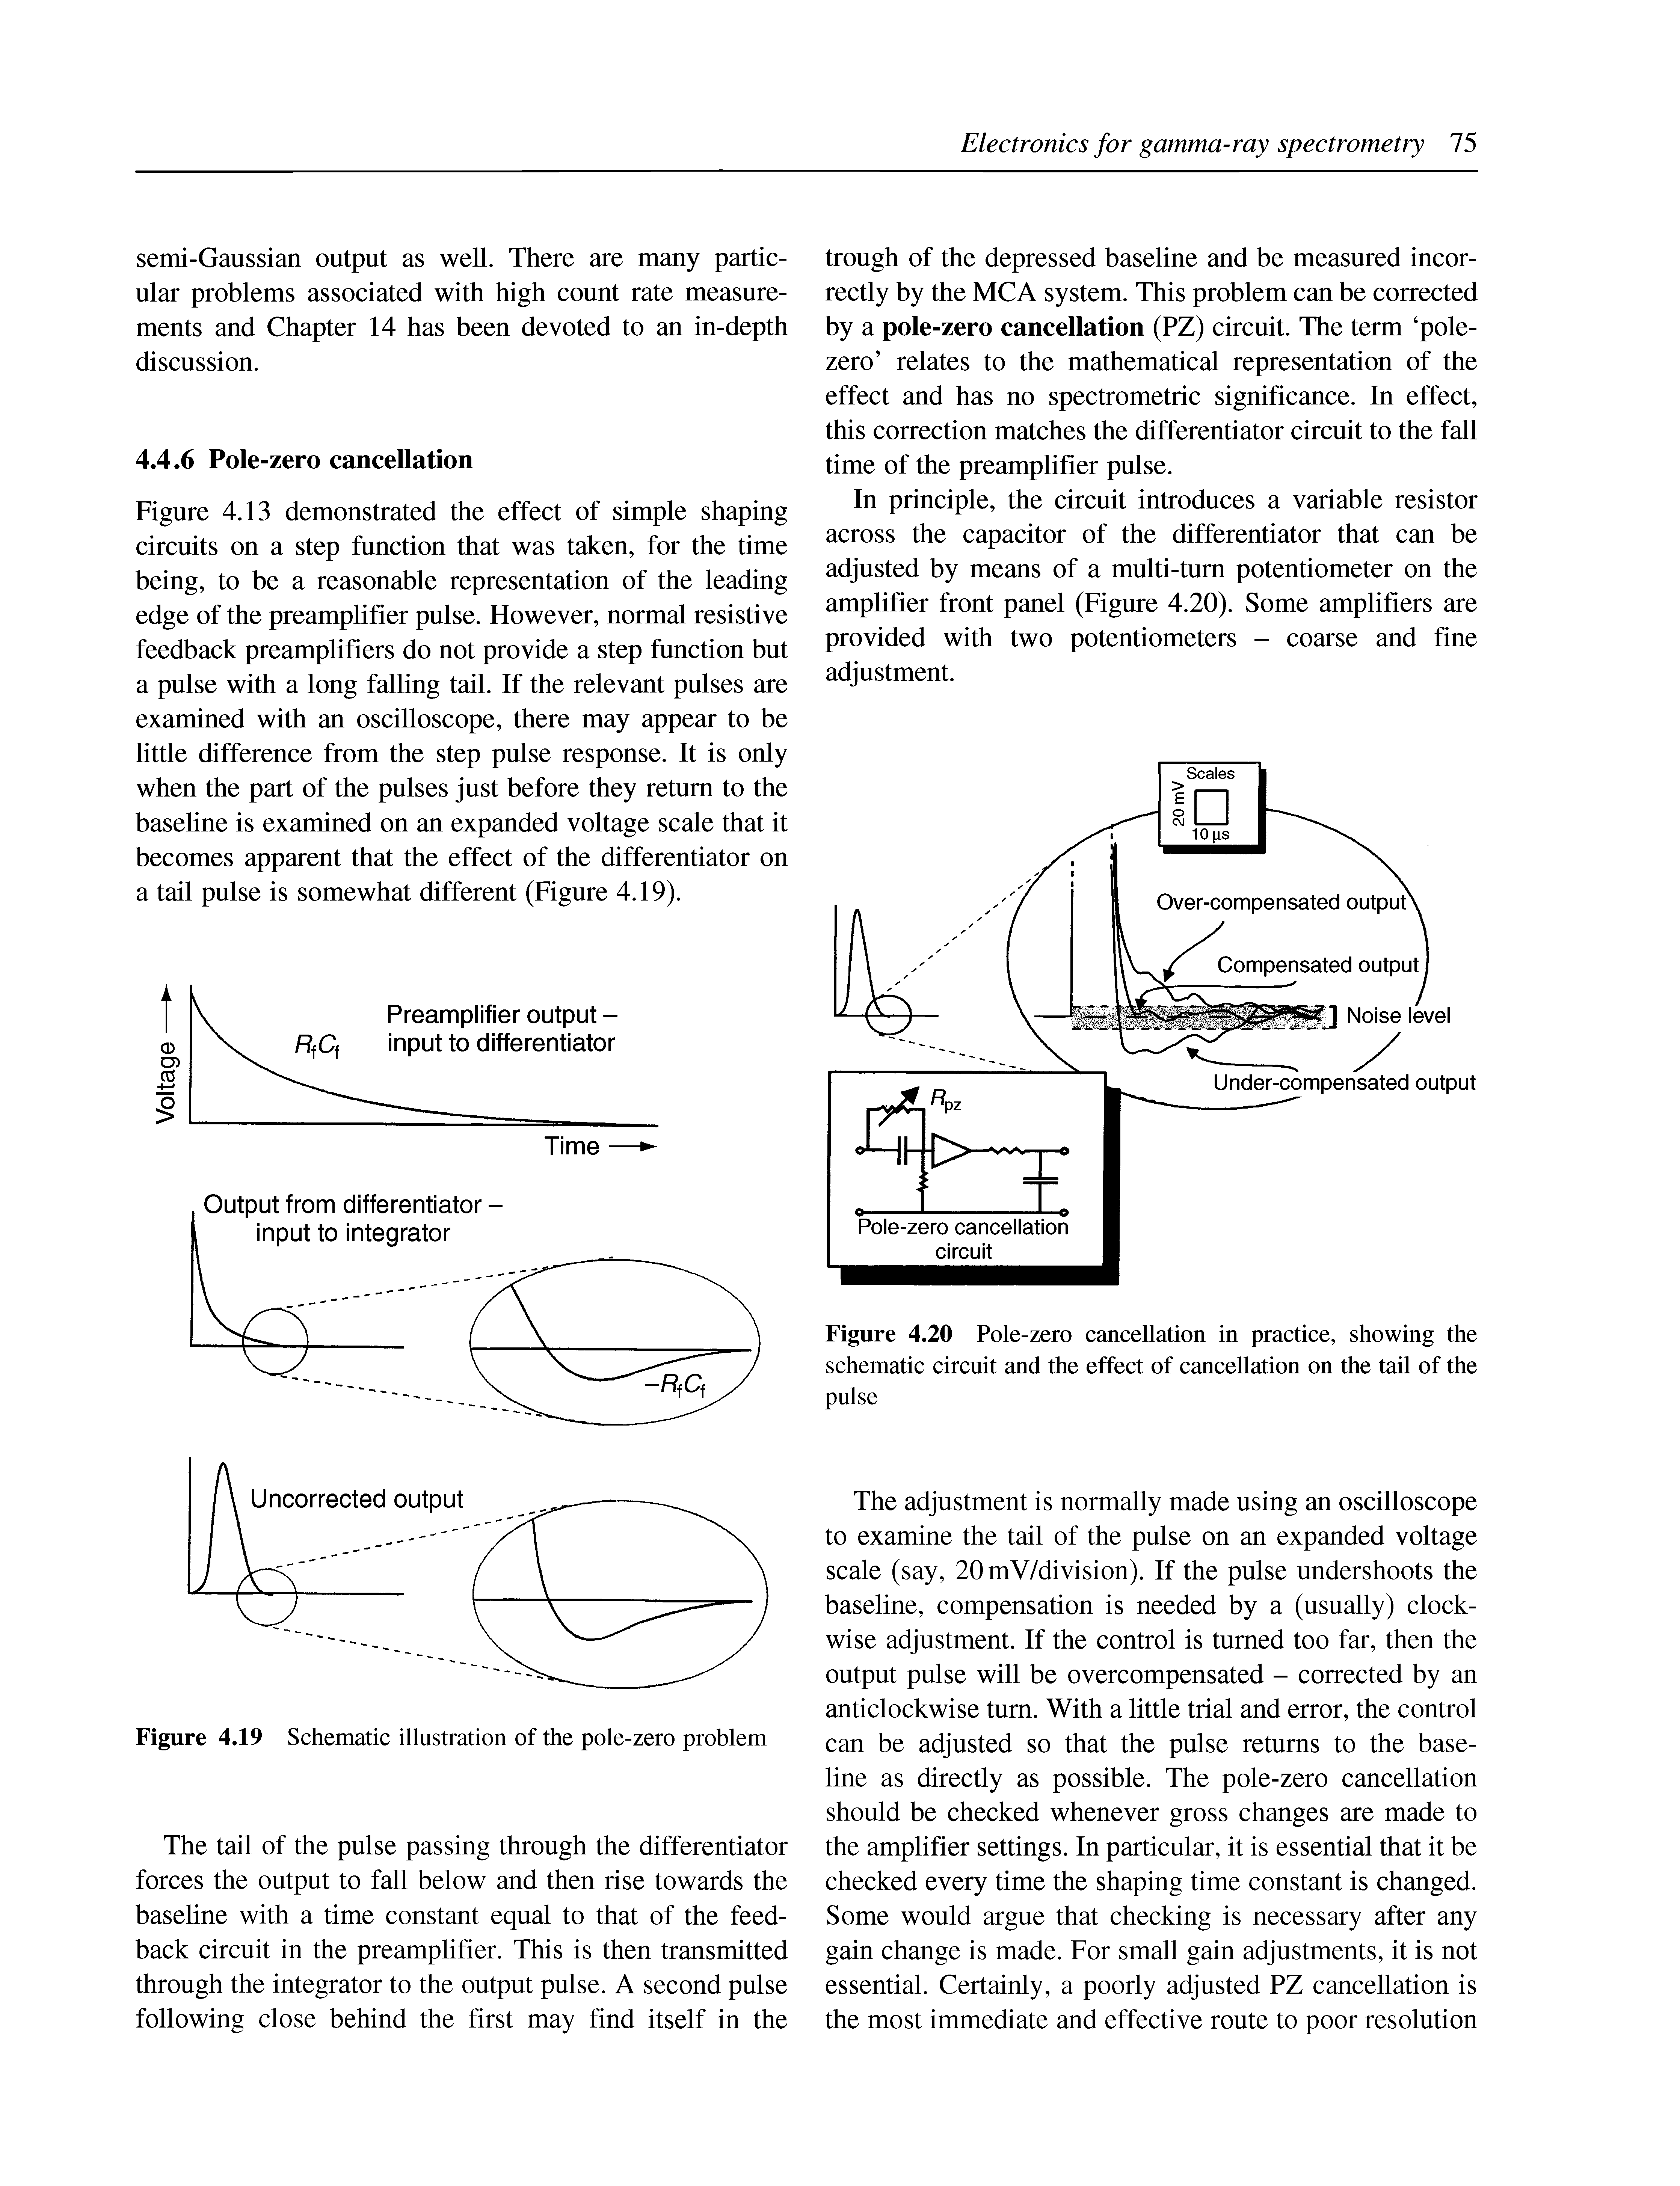 Figure 4.20 Pole-zero cancellation in practice, showing the schematic circuit and the effect of cancellation on the tail of the pulse...